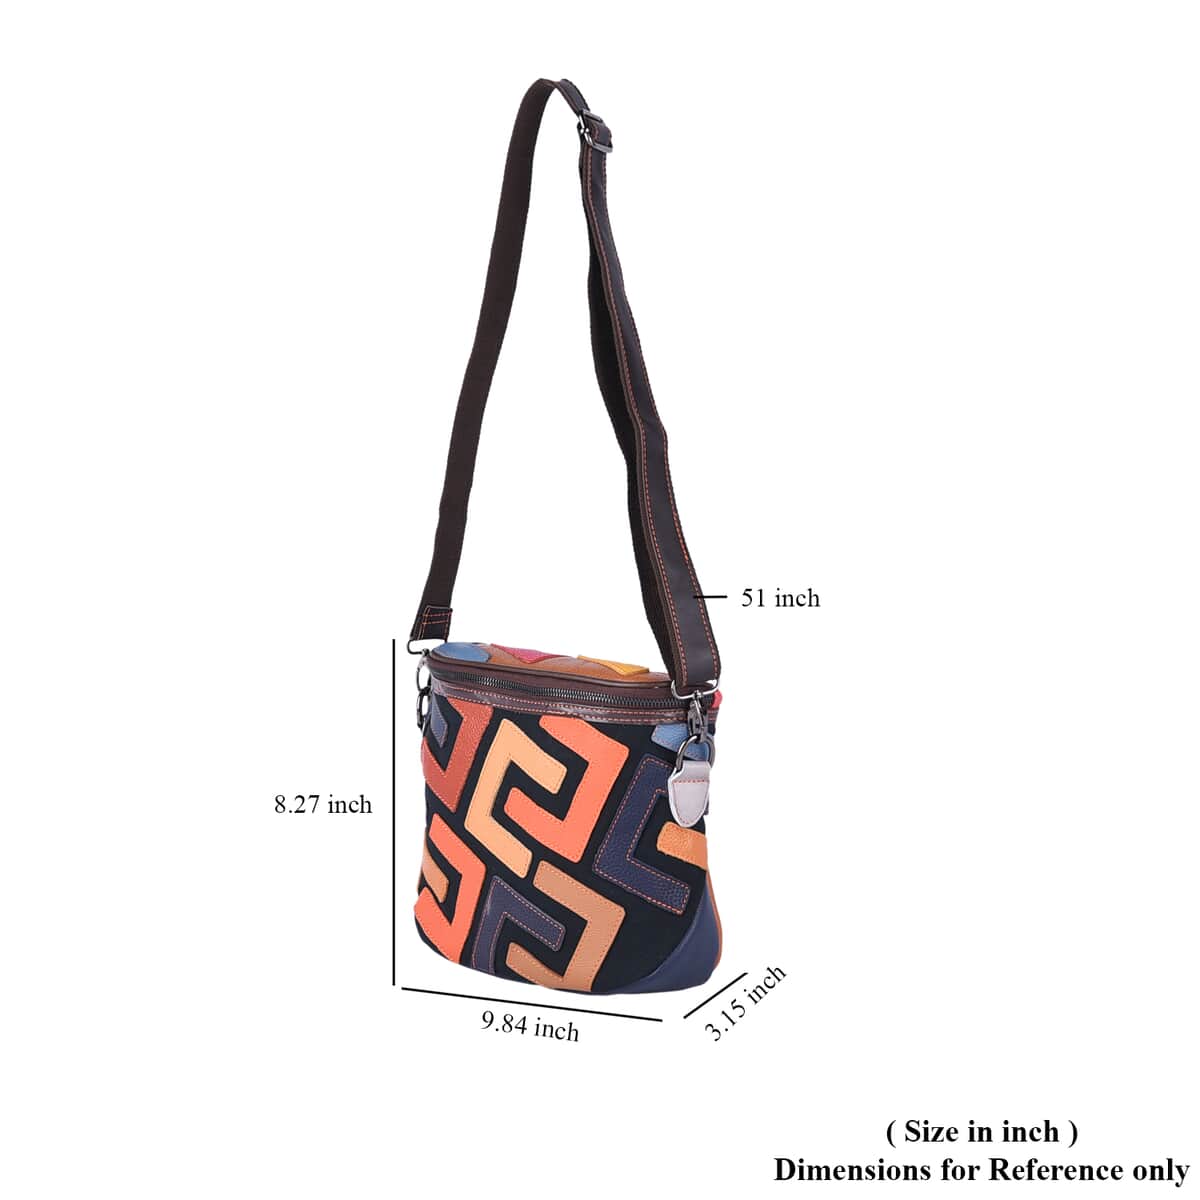 CHAOS BY ELSIE Multi Color Fret Pattern Genuine Leather Crossbody Bag with Shoulder Strap (9.84"x3.15"x8.27") image number 6